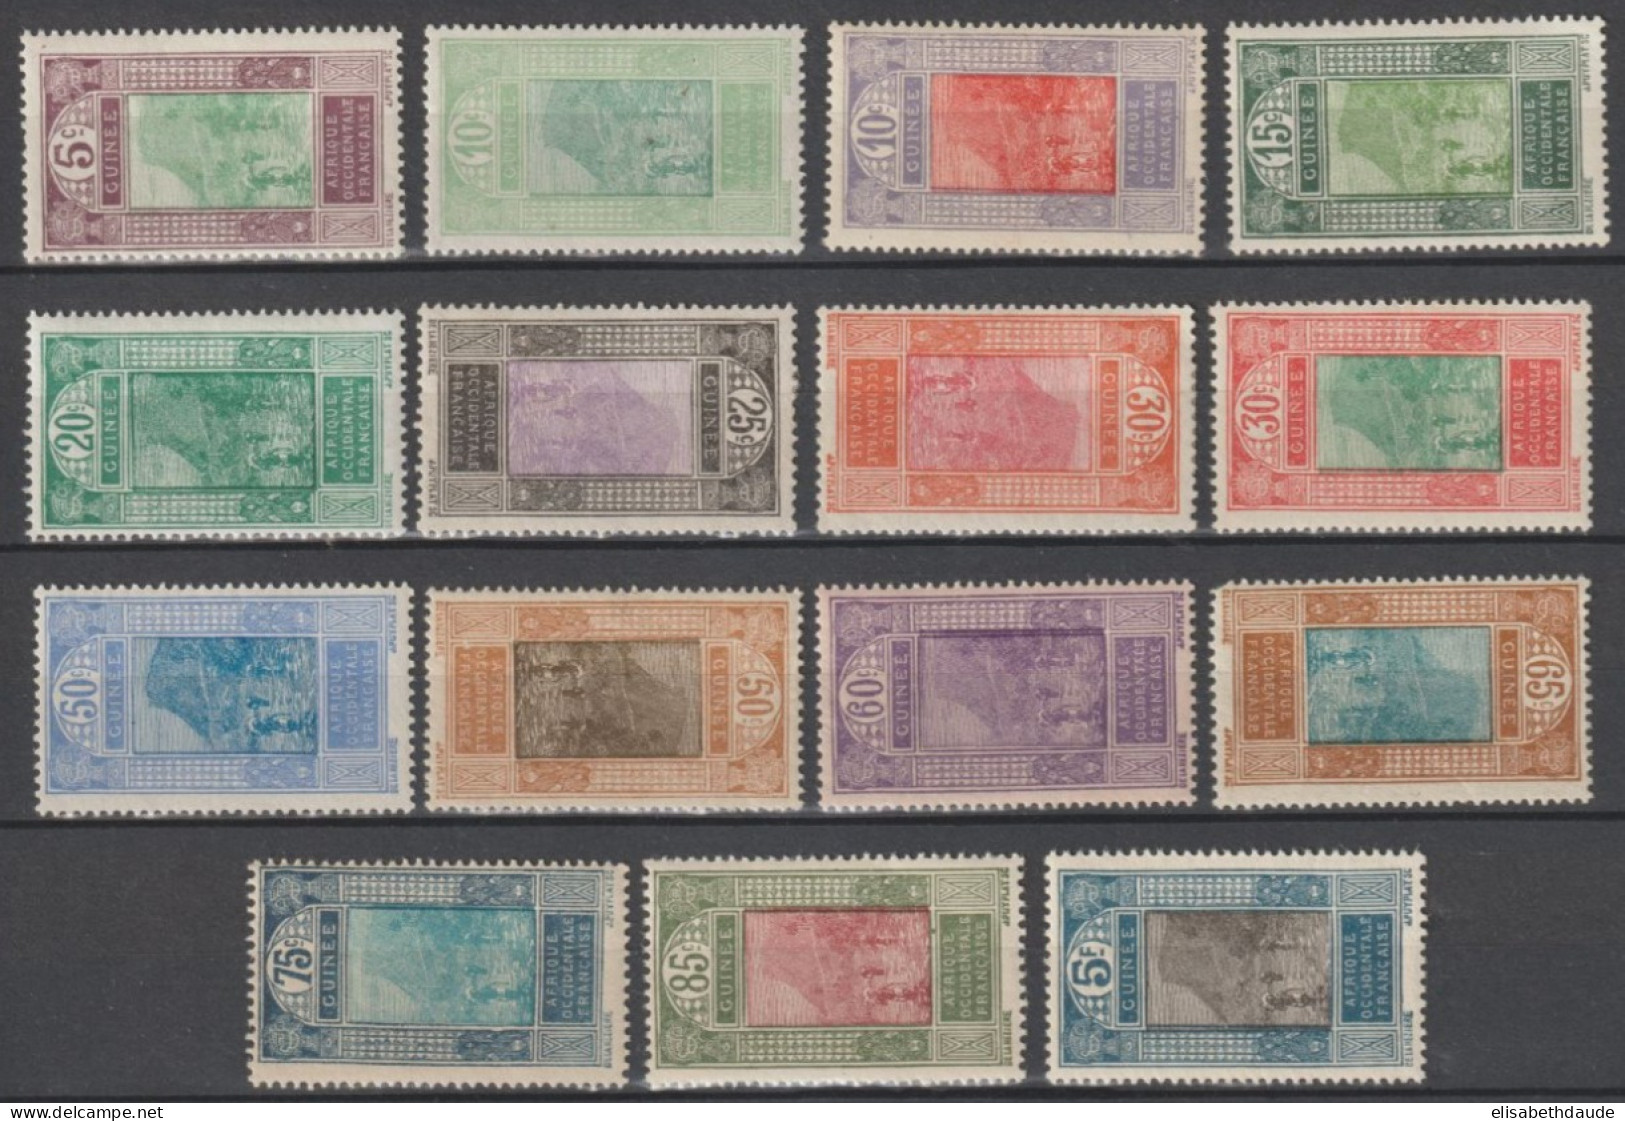 GUINEE - 1922 - SERIE COMPLETE YVERT N°84/98 ** MNH (QUELQUES * MH) - COTE = 22 EUR - Neufs